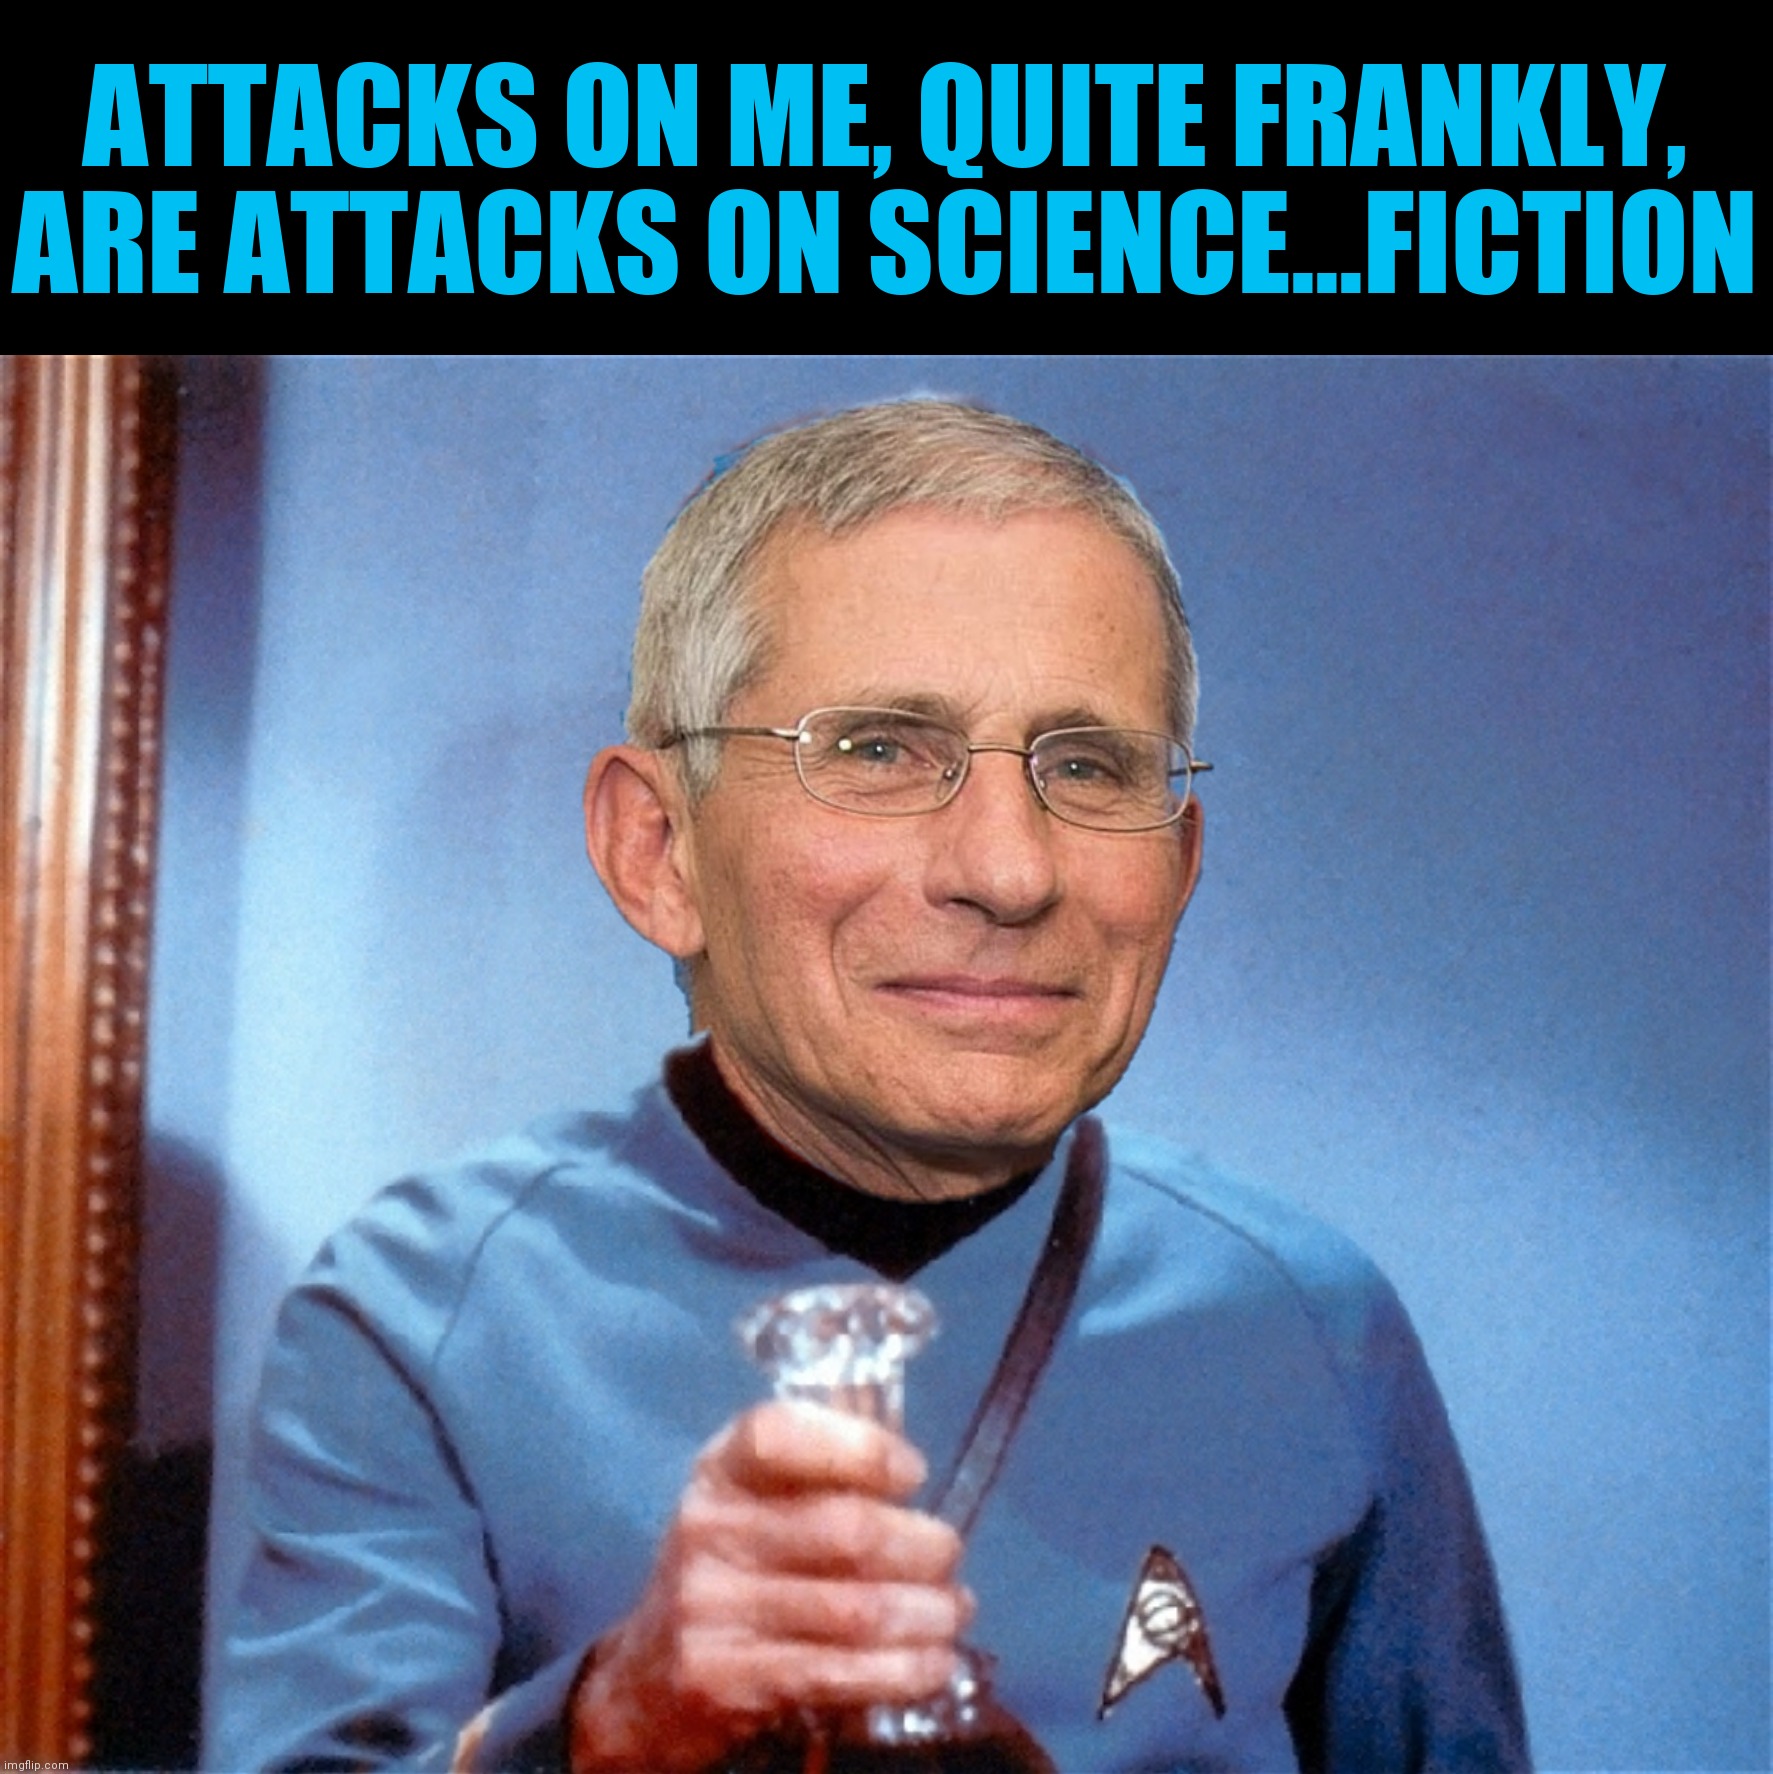 Skin And Bones |  ATTACKS ON ME, QUITE FRANKLY, ARE ATTACKS ON SCIENCE...FICTION | image tagged in bad photoshop,anthony fauci,star trek,bones mccoy | made w/ Imgflip meme maker